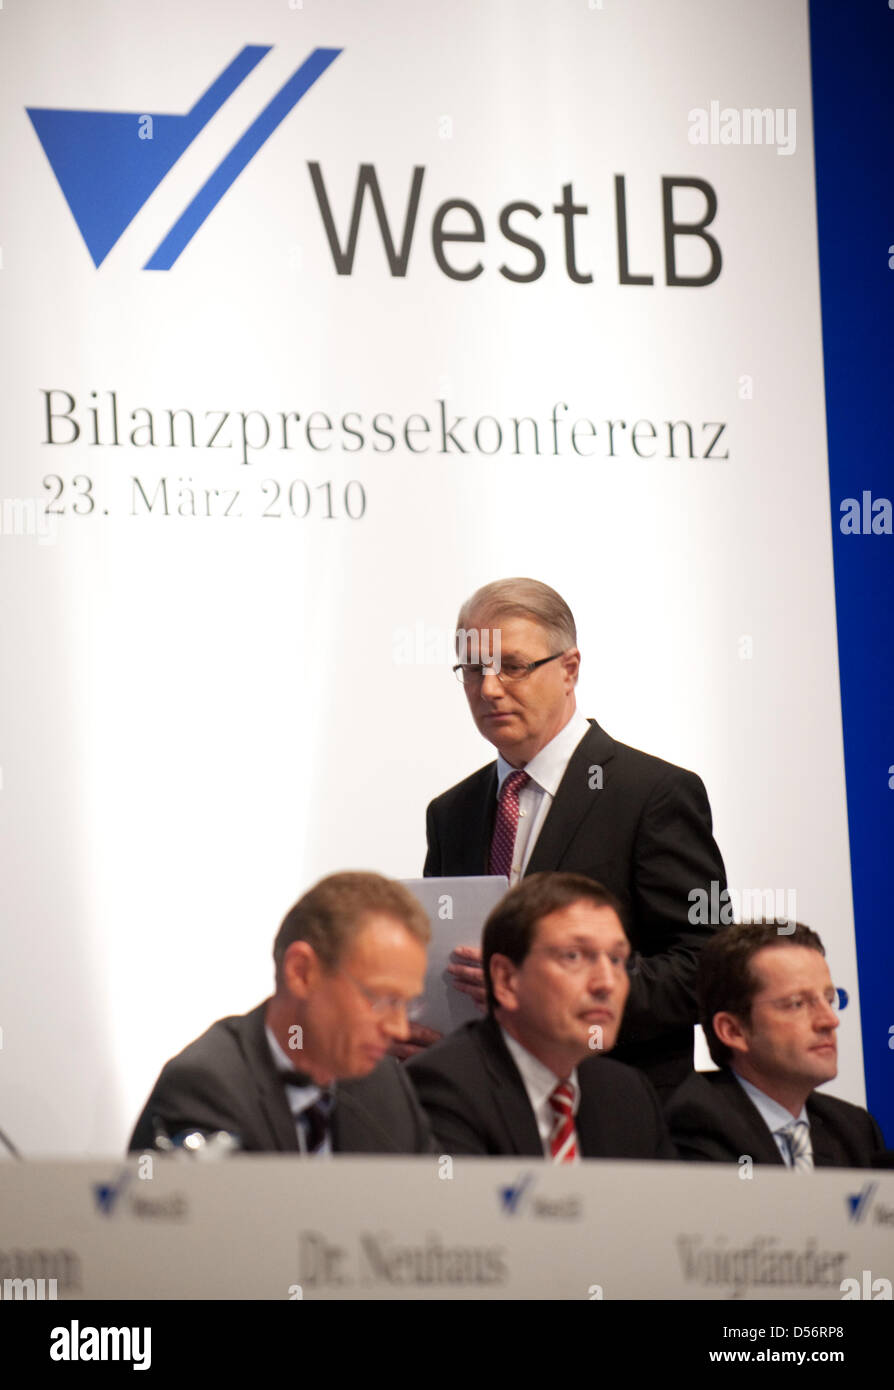 CEO Dietrich Voigtlaender of WestLB (back) passes his board colleagues Hans-Juergen Niehaus, Werner Taiber and Klemens Breuer (L-R) at a balance press conference in Duesseldorf, Germany, 23 March 2010. Germany's third largest regional state bank made a huge loss in 2009 and is about to be split. Photo: BERND THISSEN Stock Photo